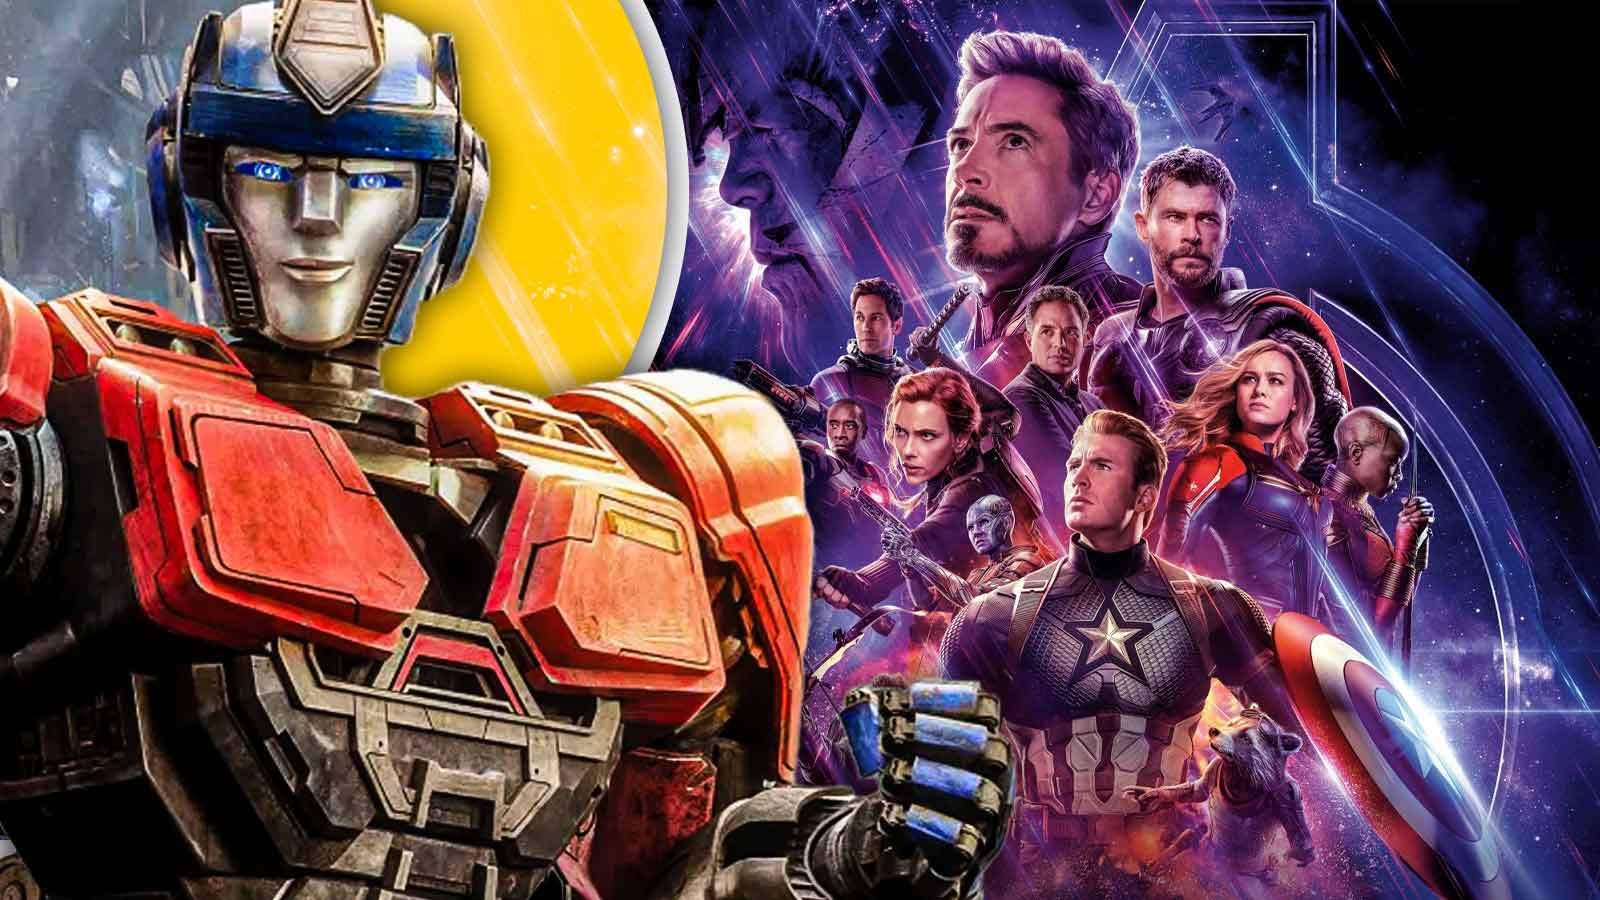 Chris Hemsworth Finally Went for the Head: ‘Transformers One’ Corrects a Major Flaw from ‘Avengers: Infinity War’ as Optimus Prime Suffers an Embarrassing Mishap